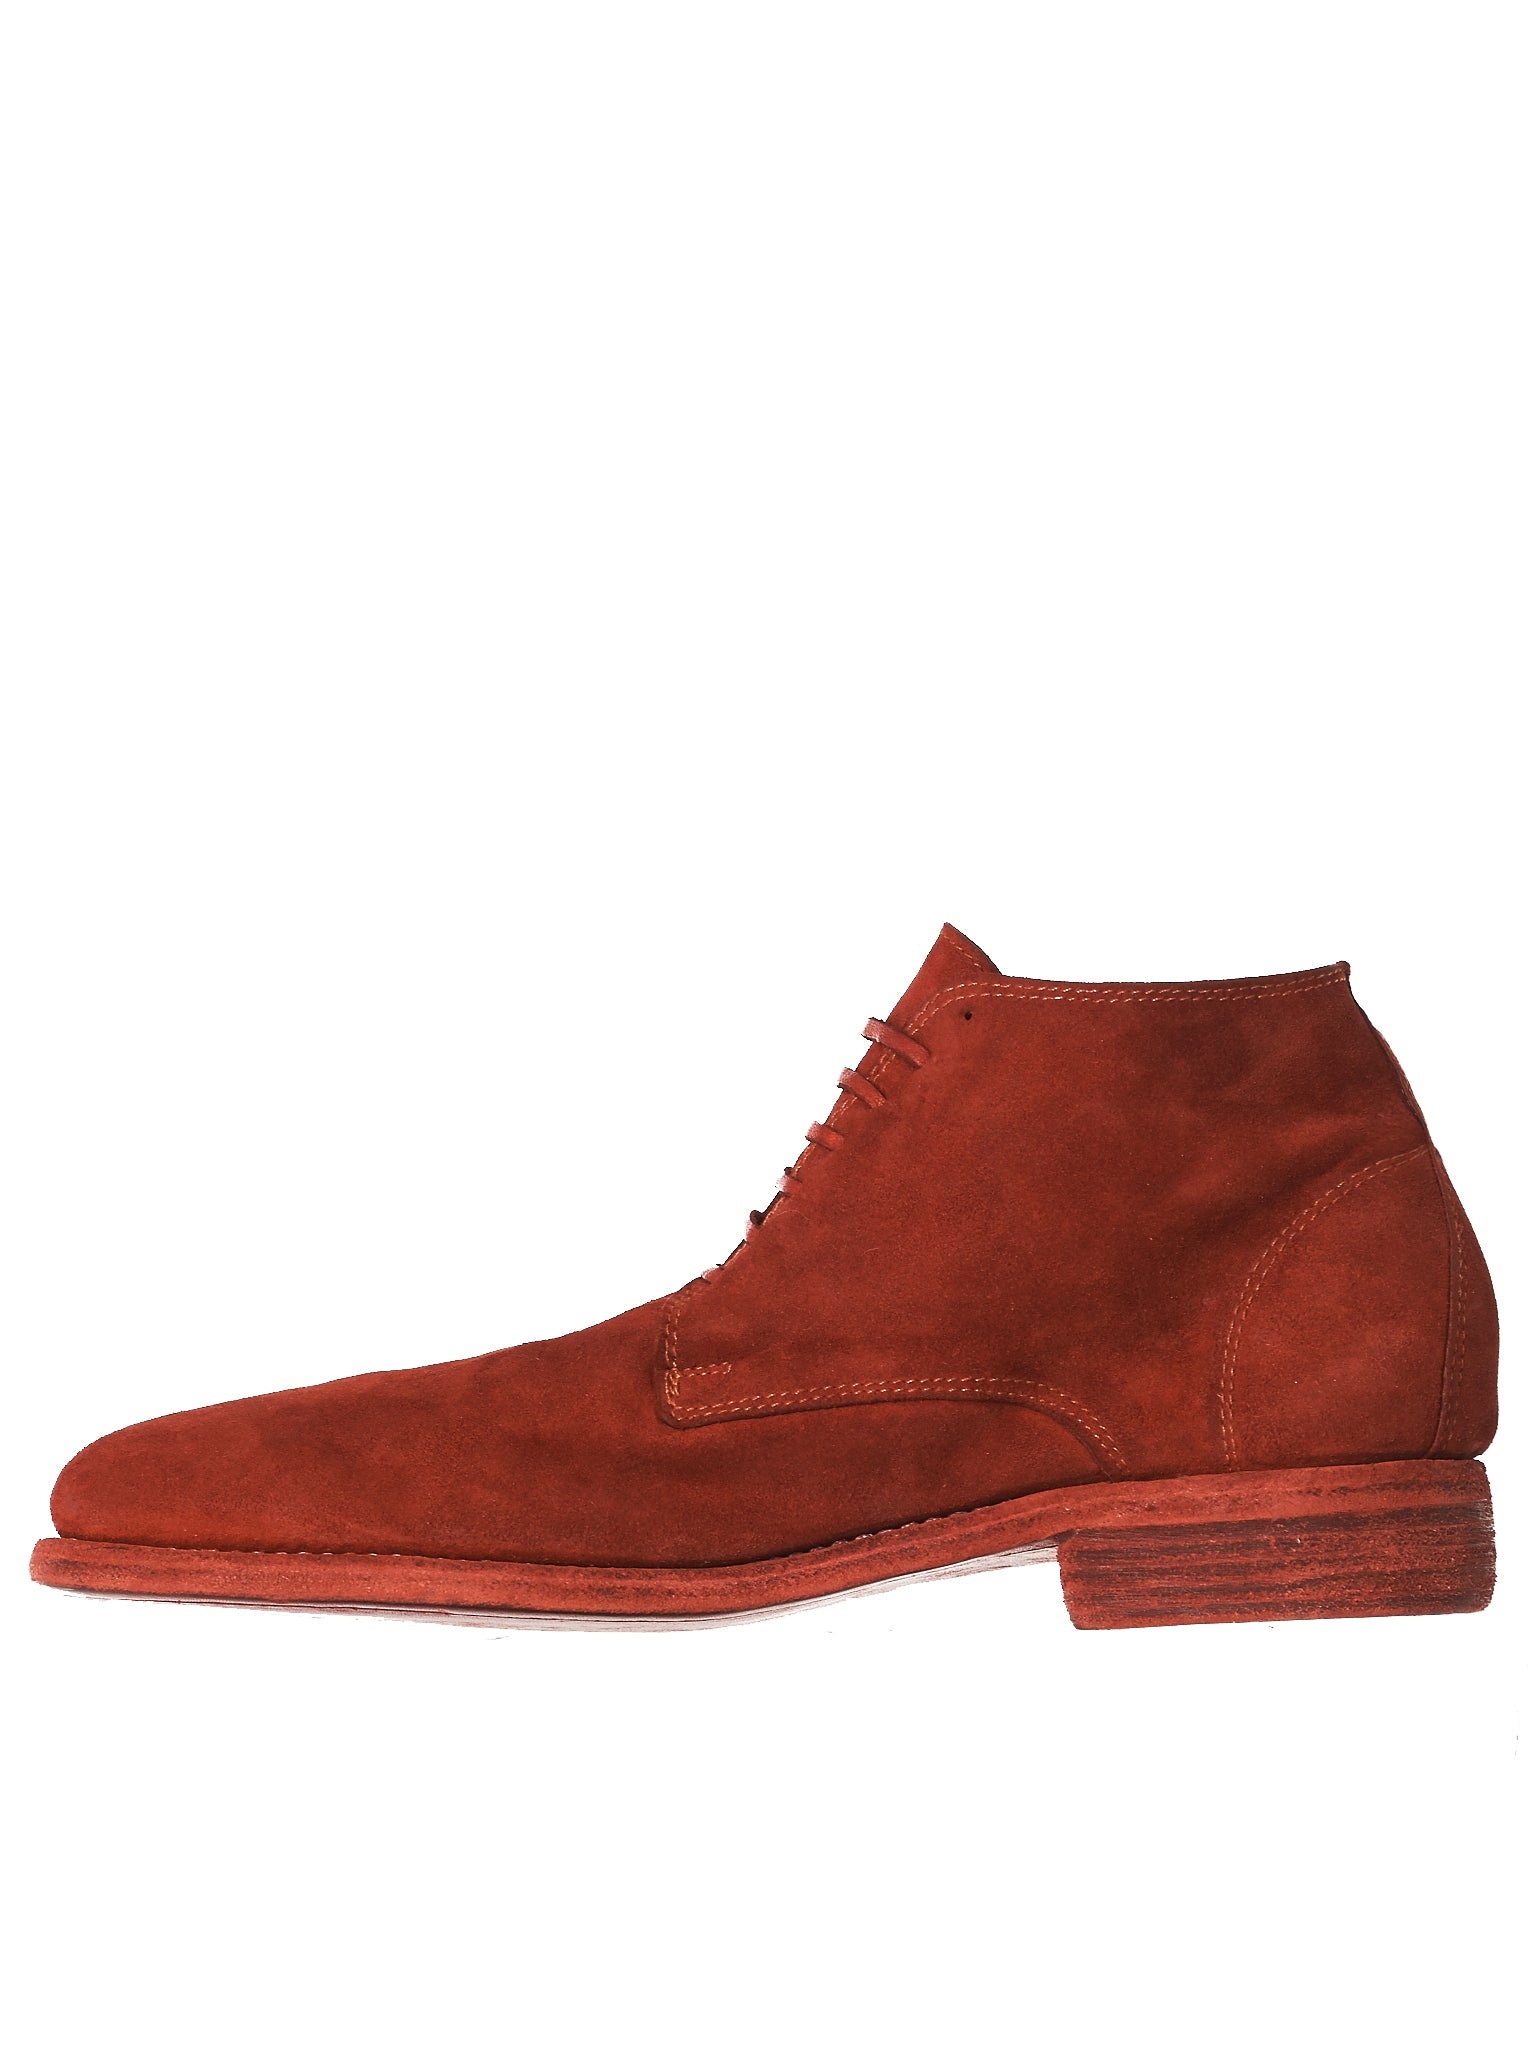 Suede Dyed Leather Boots - 3